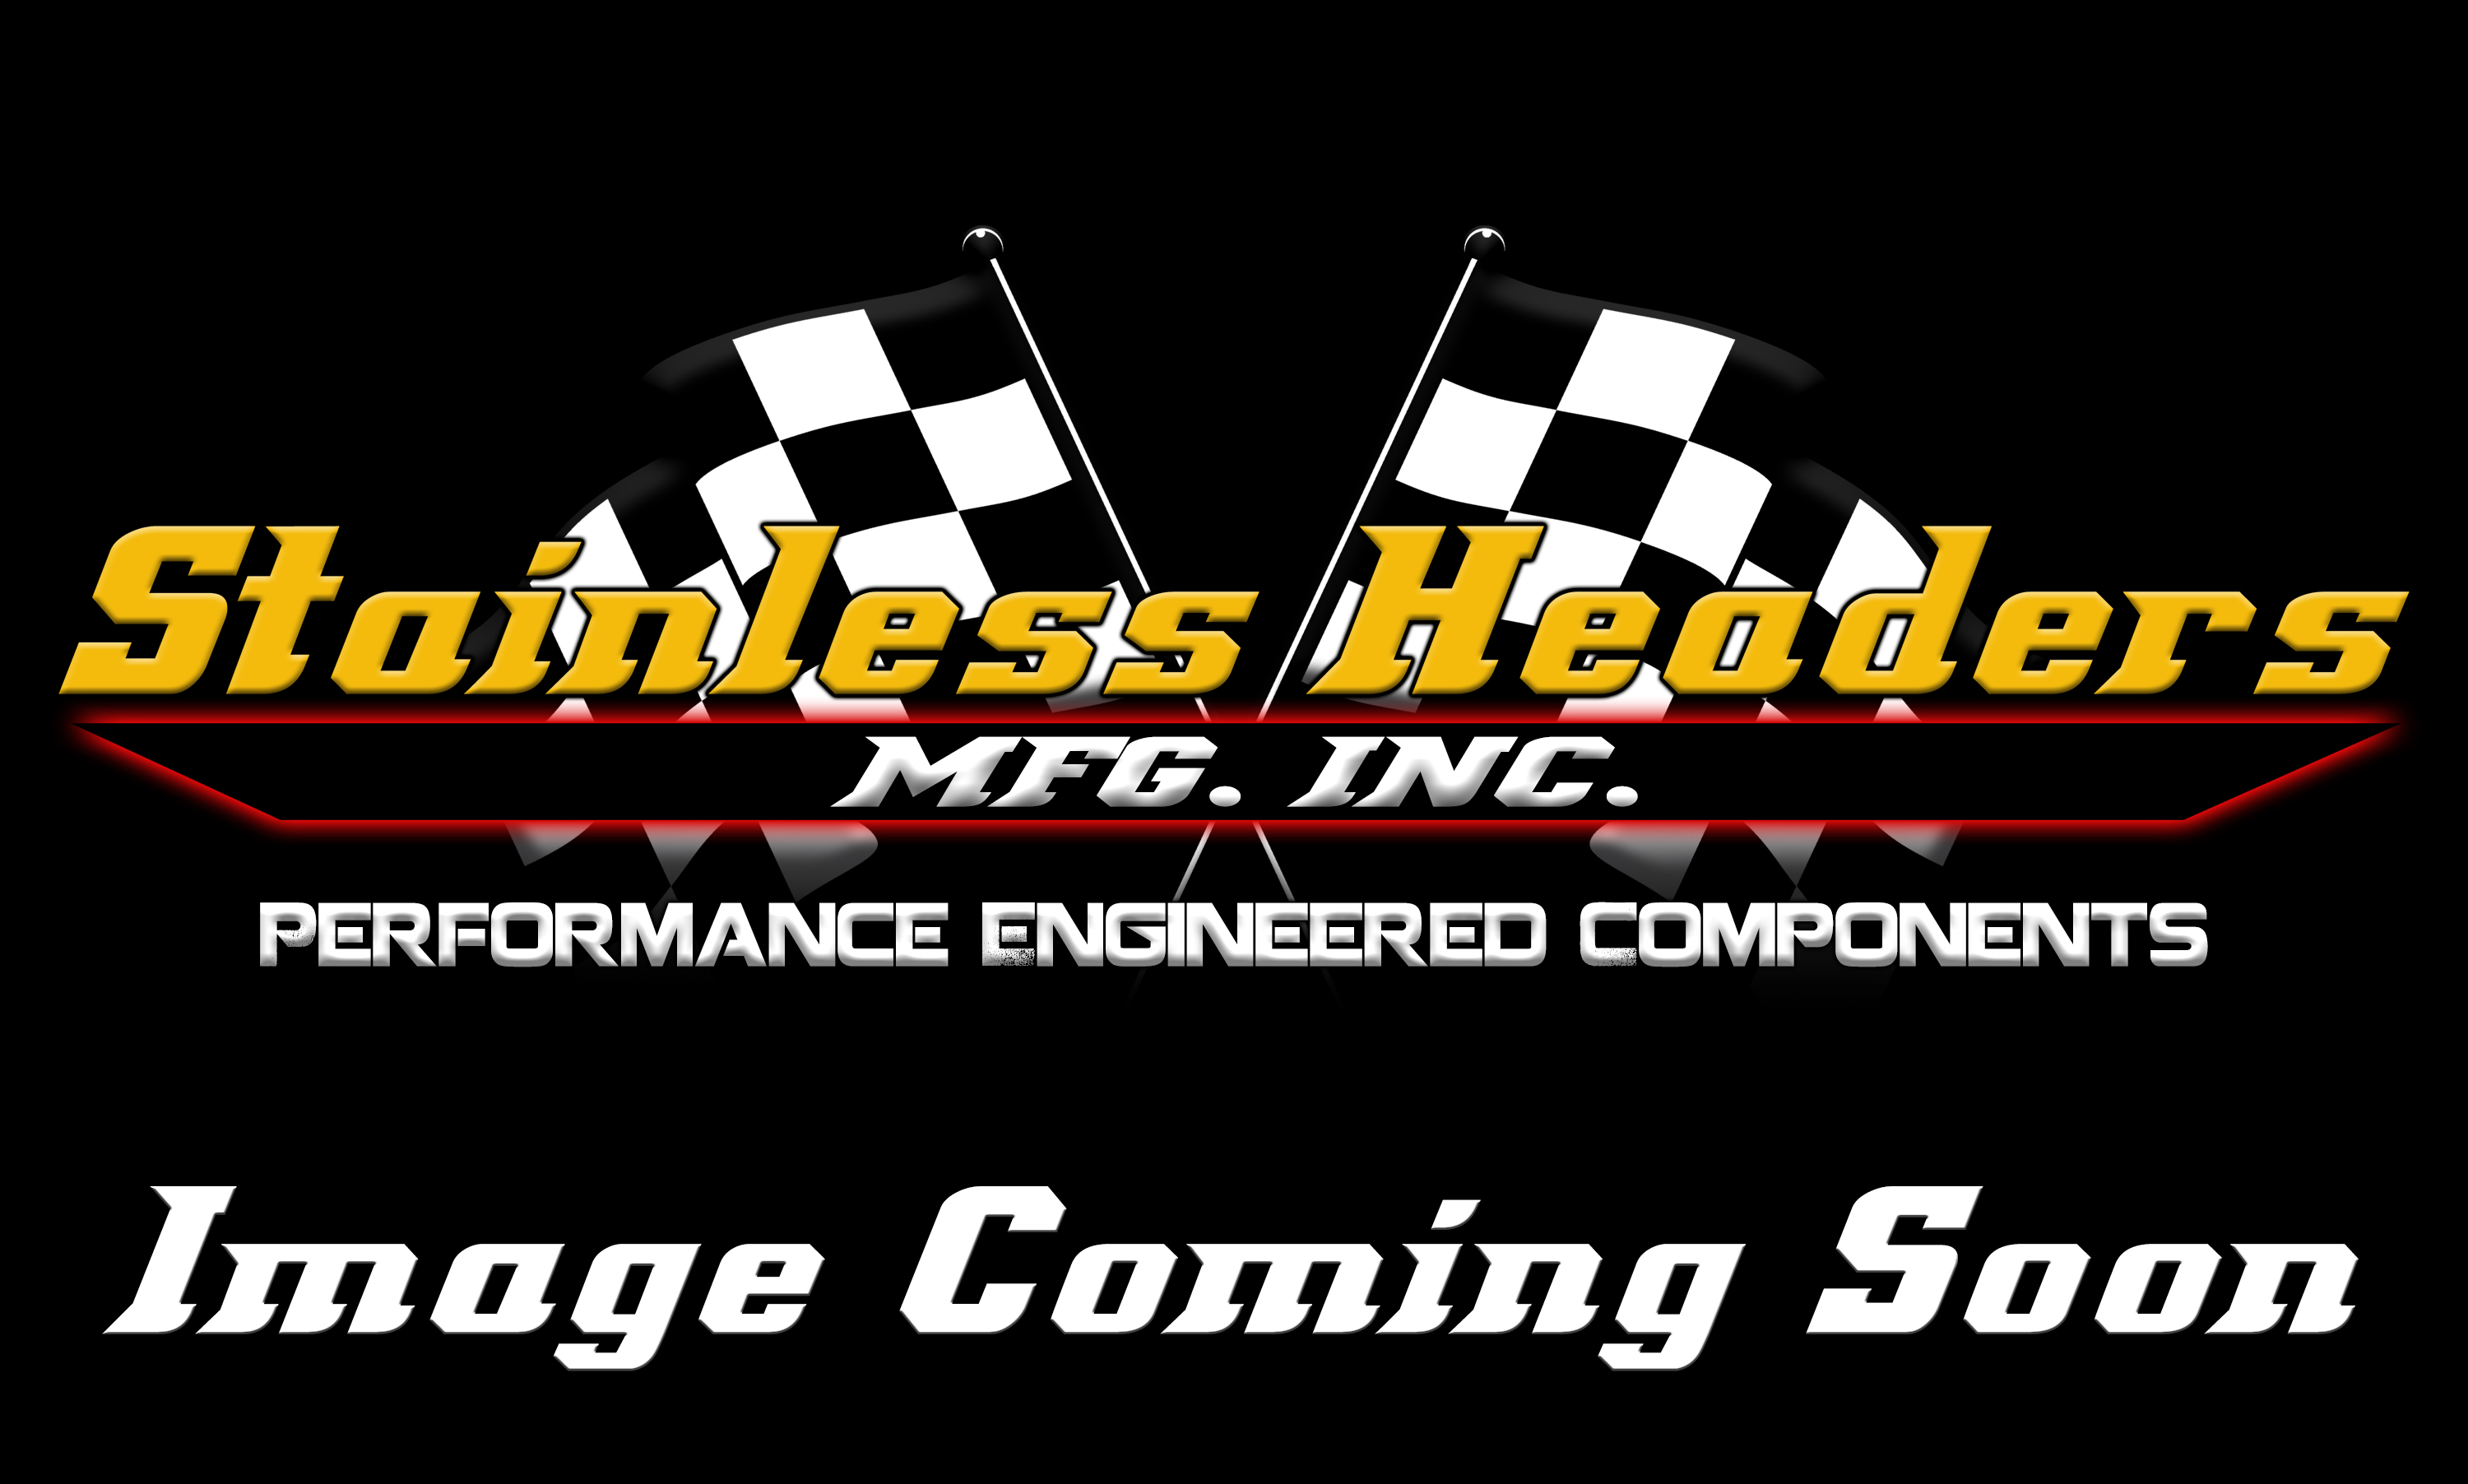 Stainless Headers - 2" Primary 2 into 1 Performance Merge Collector-16ga 304ss - Image 2